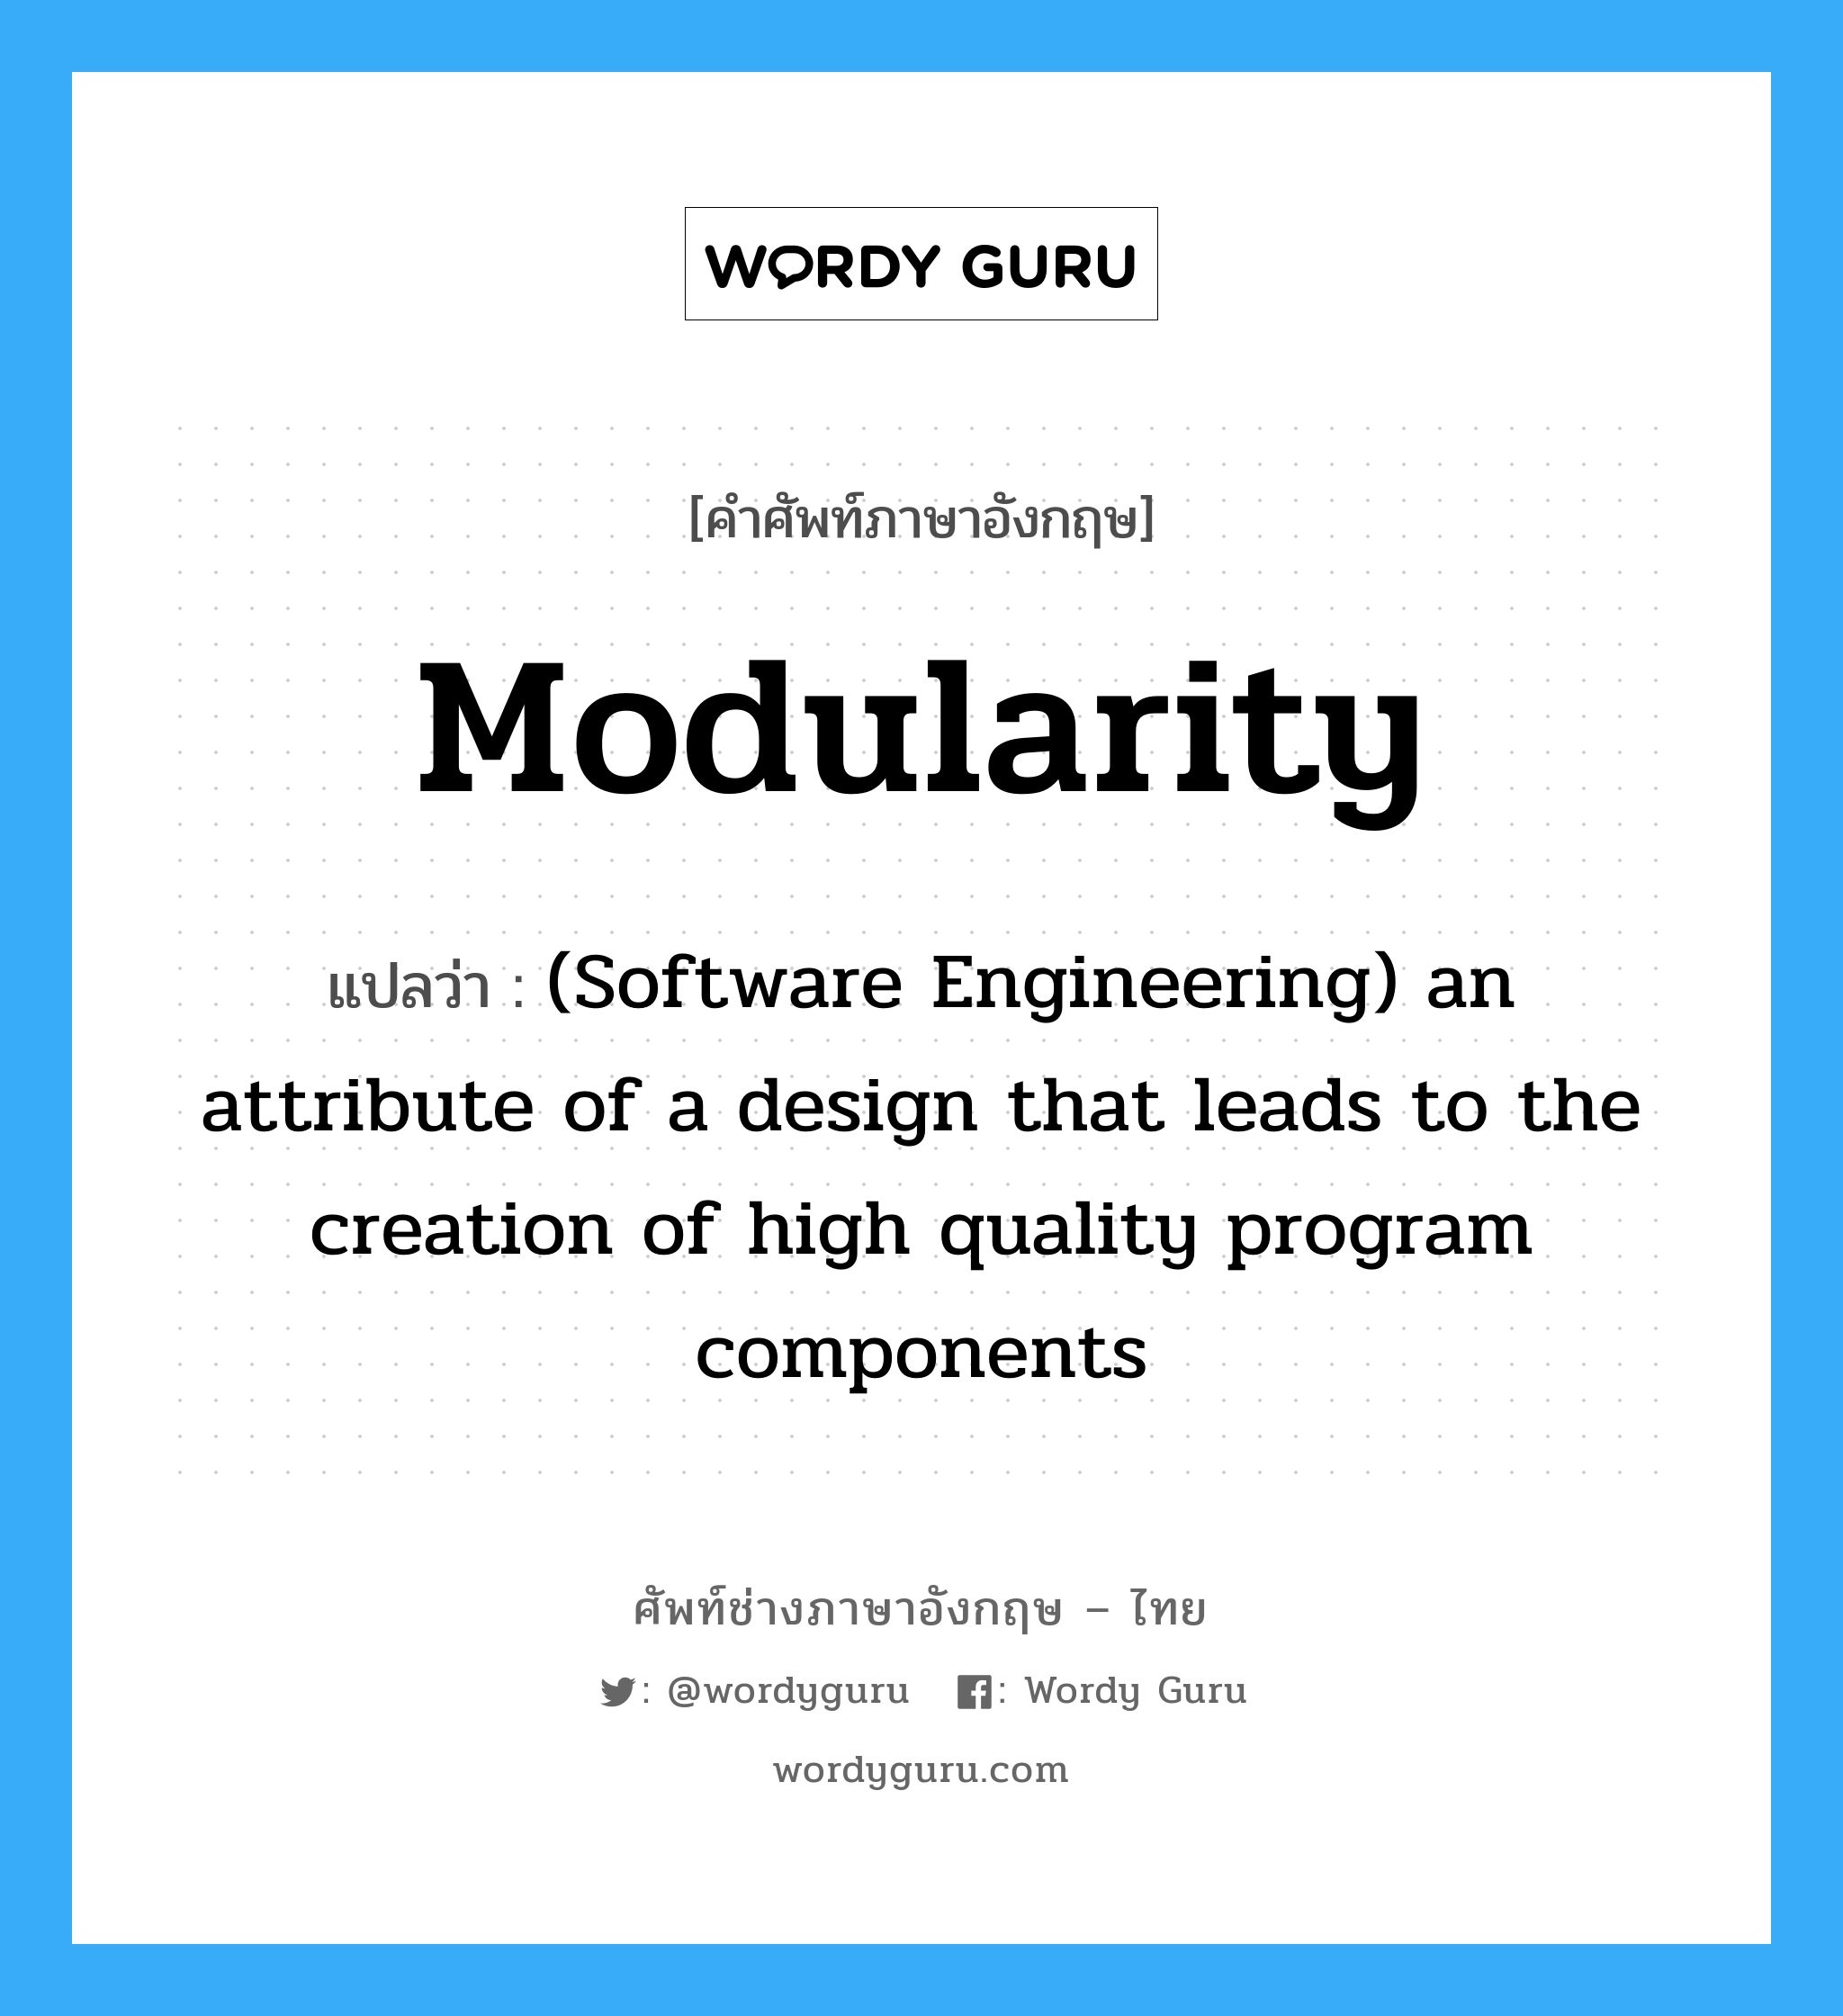 Modularity แปลว่า?, คำศัพท์ช่างภาษาอังกฤษ - ไทย Modularity คำศัพท์ภาษาอังกฤษ Modularity แปลว่า (Software Engineering) an attribute of a design that leads to the creation of high quality program components